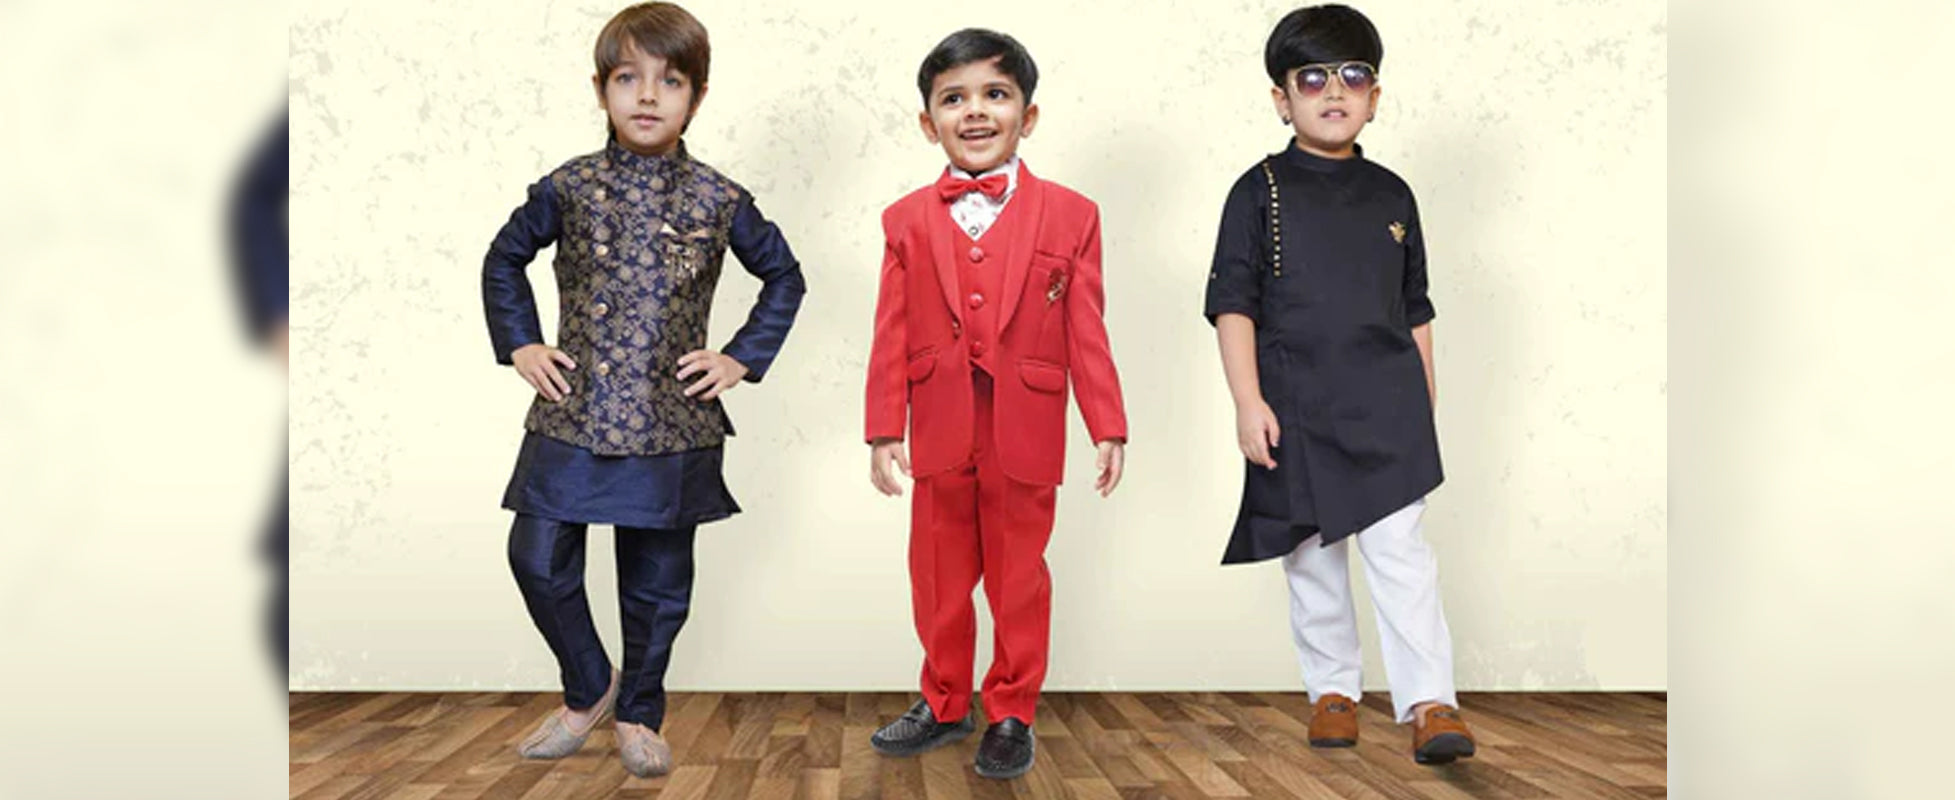 10 Trendy Indian Wedding Dresses For Boy Kids (0 Months to 14 Years)